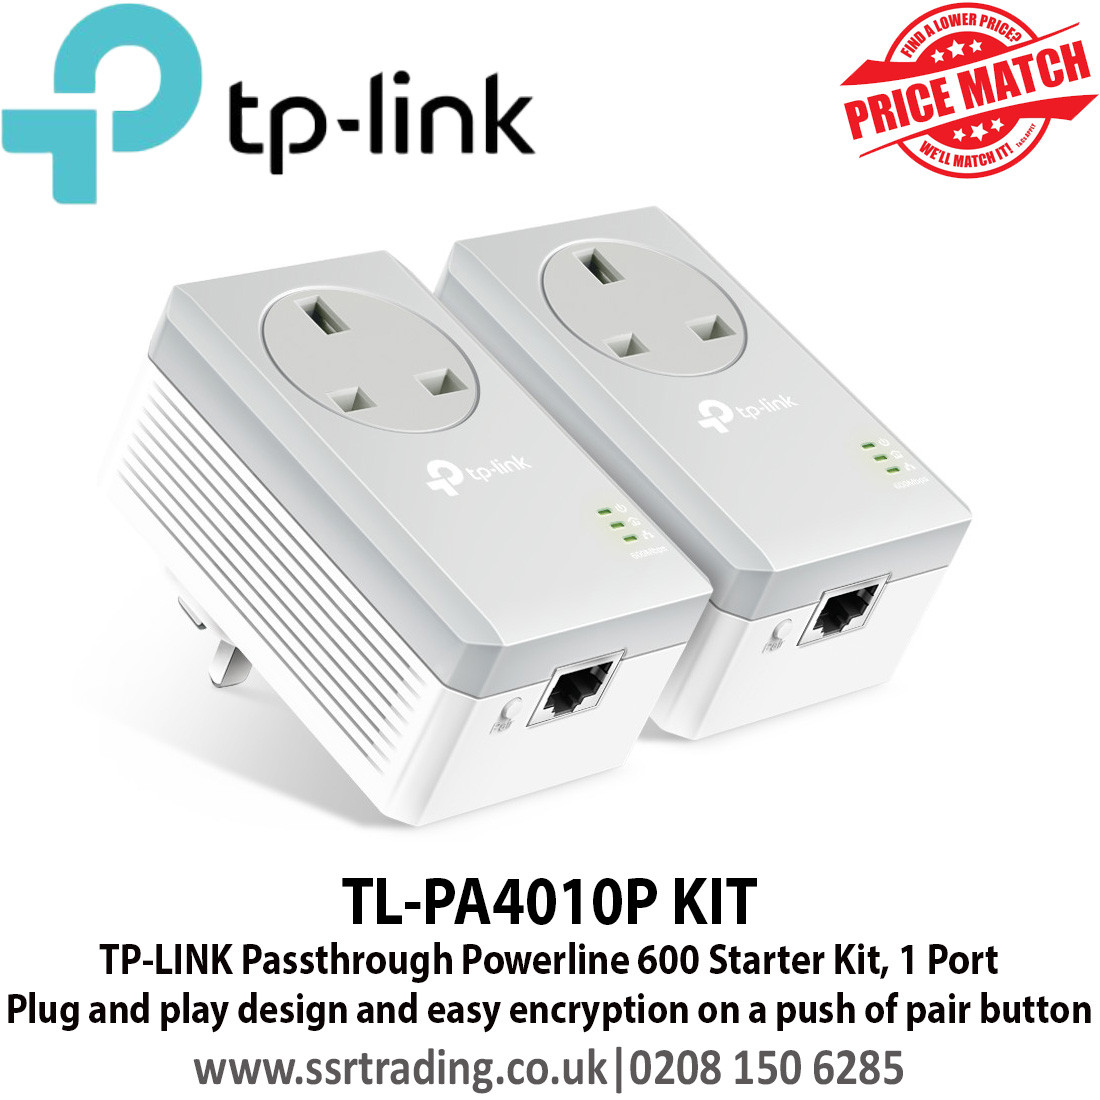 TP-LINK TL-PA4010P KIT Passthrough Powerline 600 Starter Kit, 1 Port, Plug  and play design and easy encryption on a push of pair button